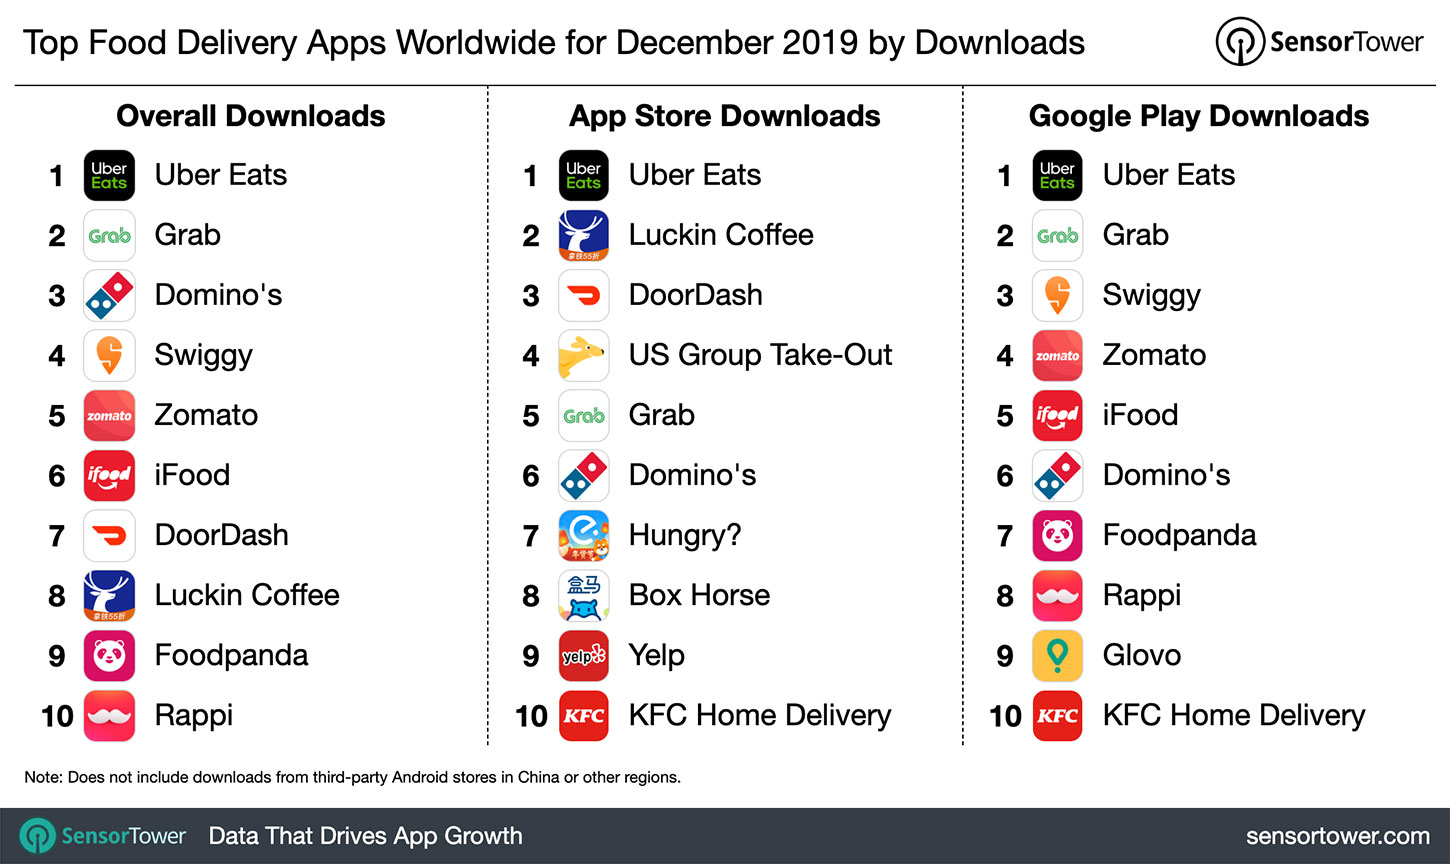 Top Food Delivery Apps Worldwide for December 2019 by Downloads